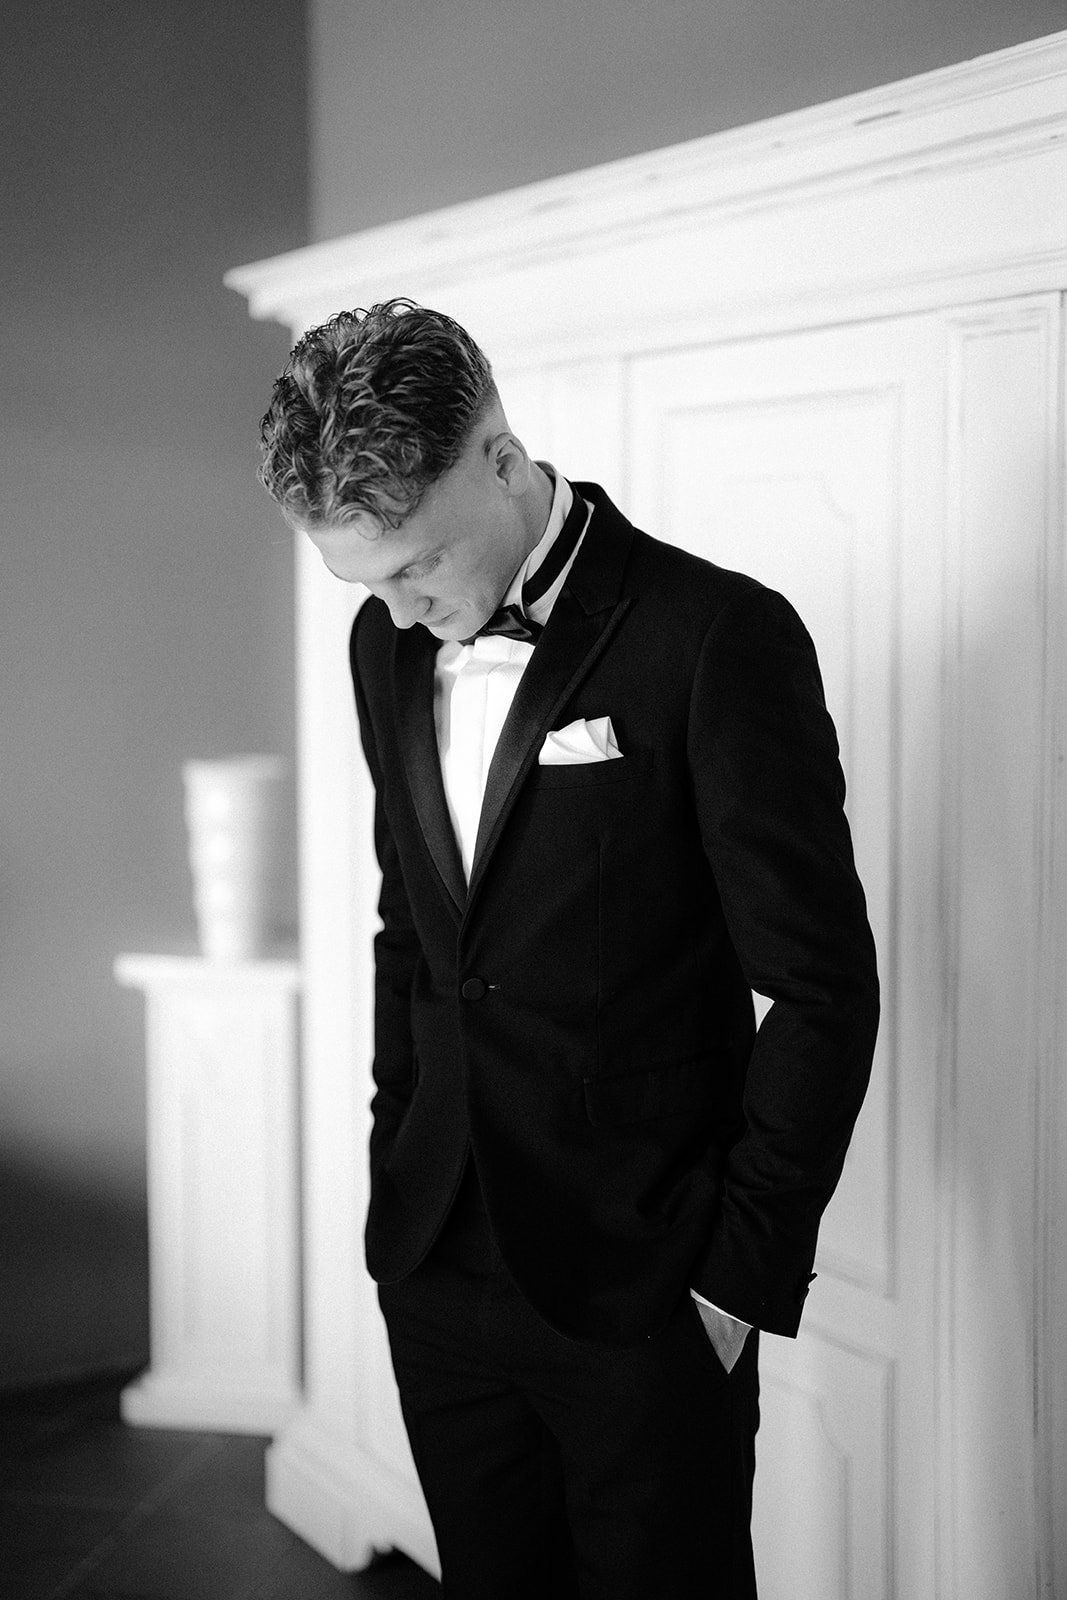 The groom checks his outfit after putting on the tuxedo for his wedding